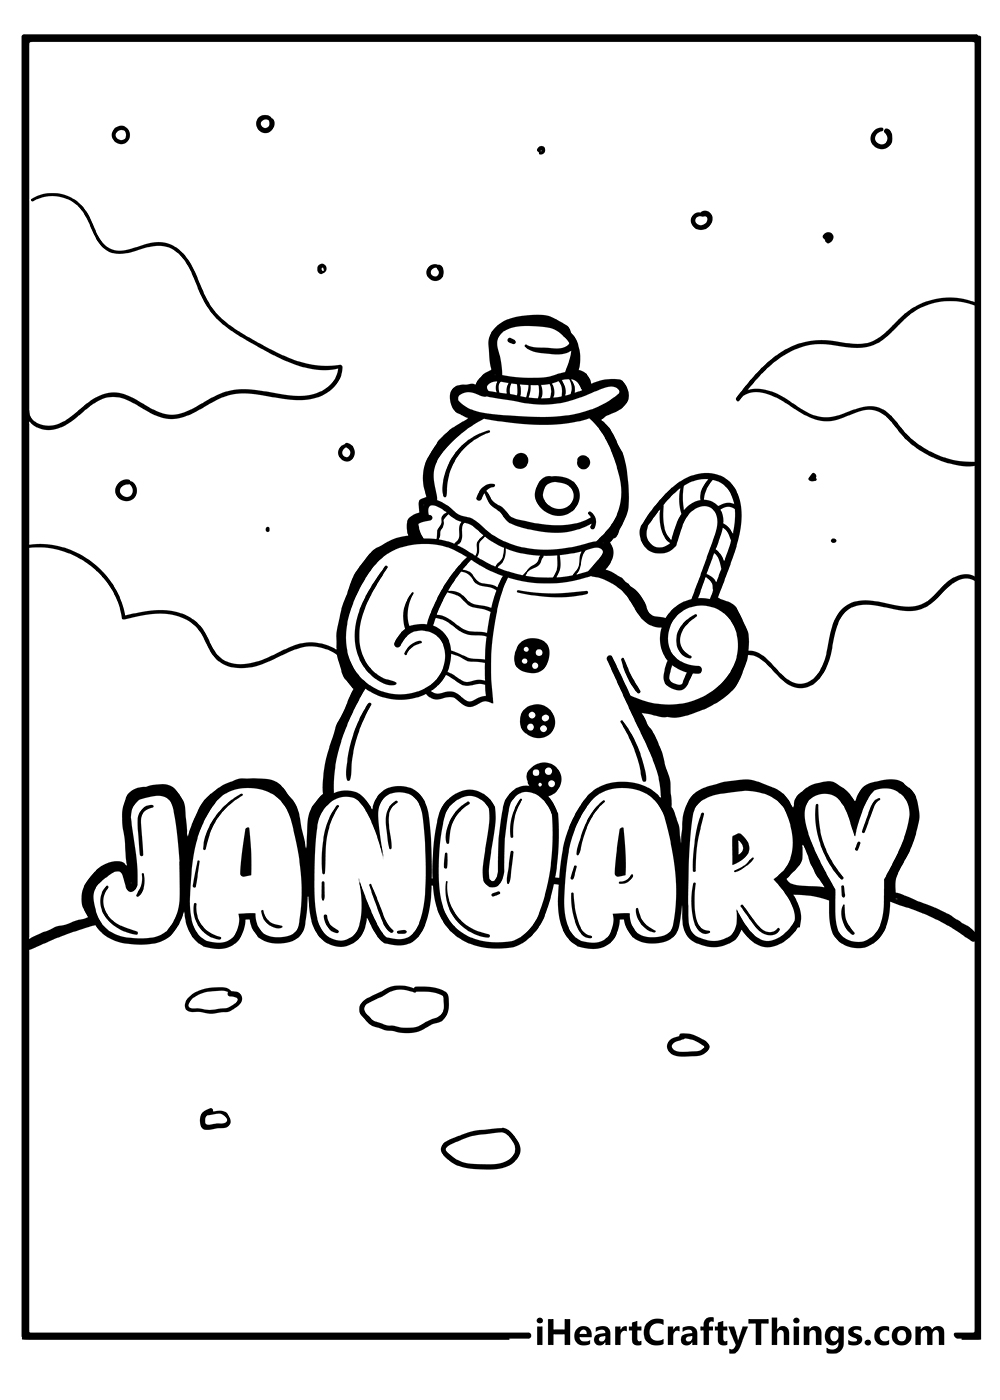 Printable January Coloring Pages Updated 20